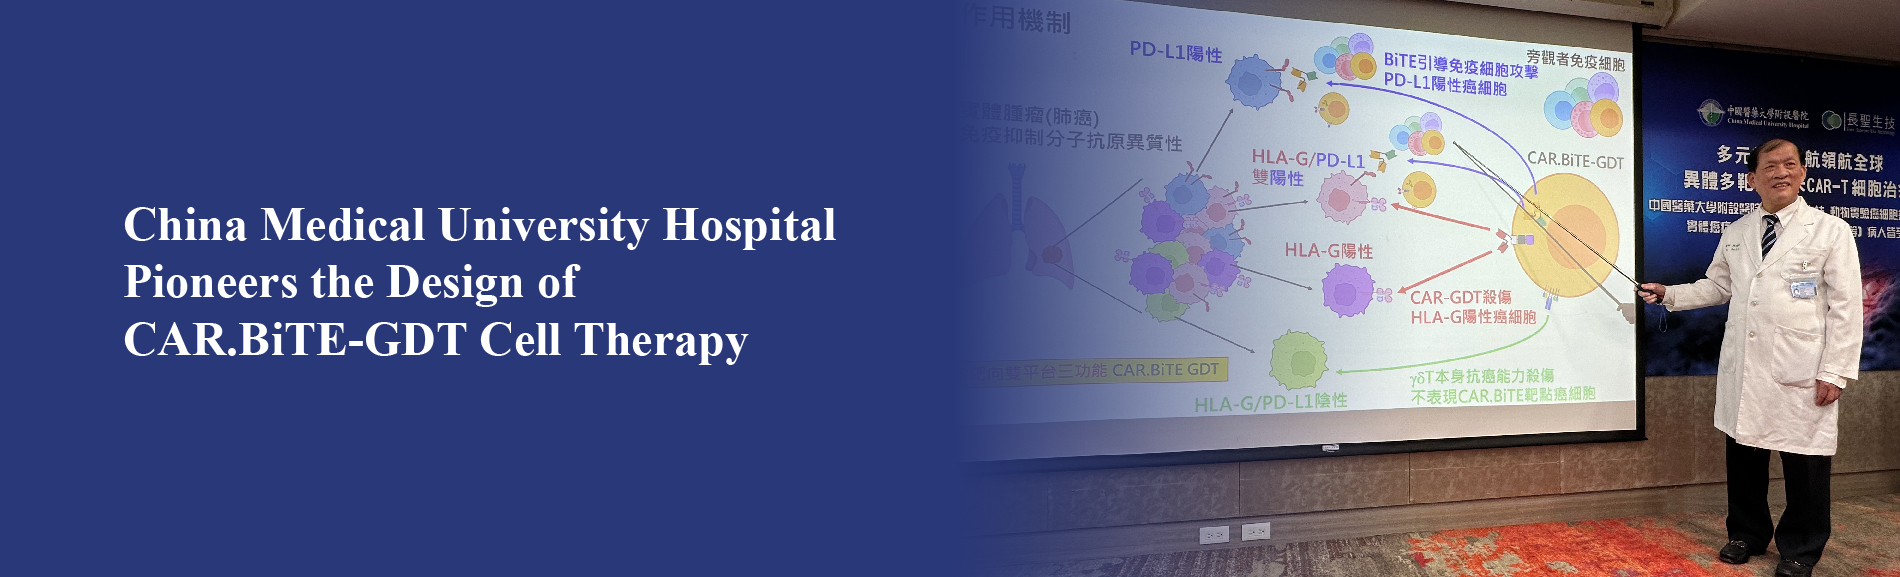 China Medical University Hospital Pioneers the Design of CAR.BiTE-GDT Cell Therapy